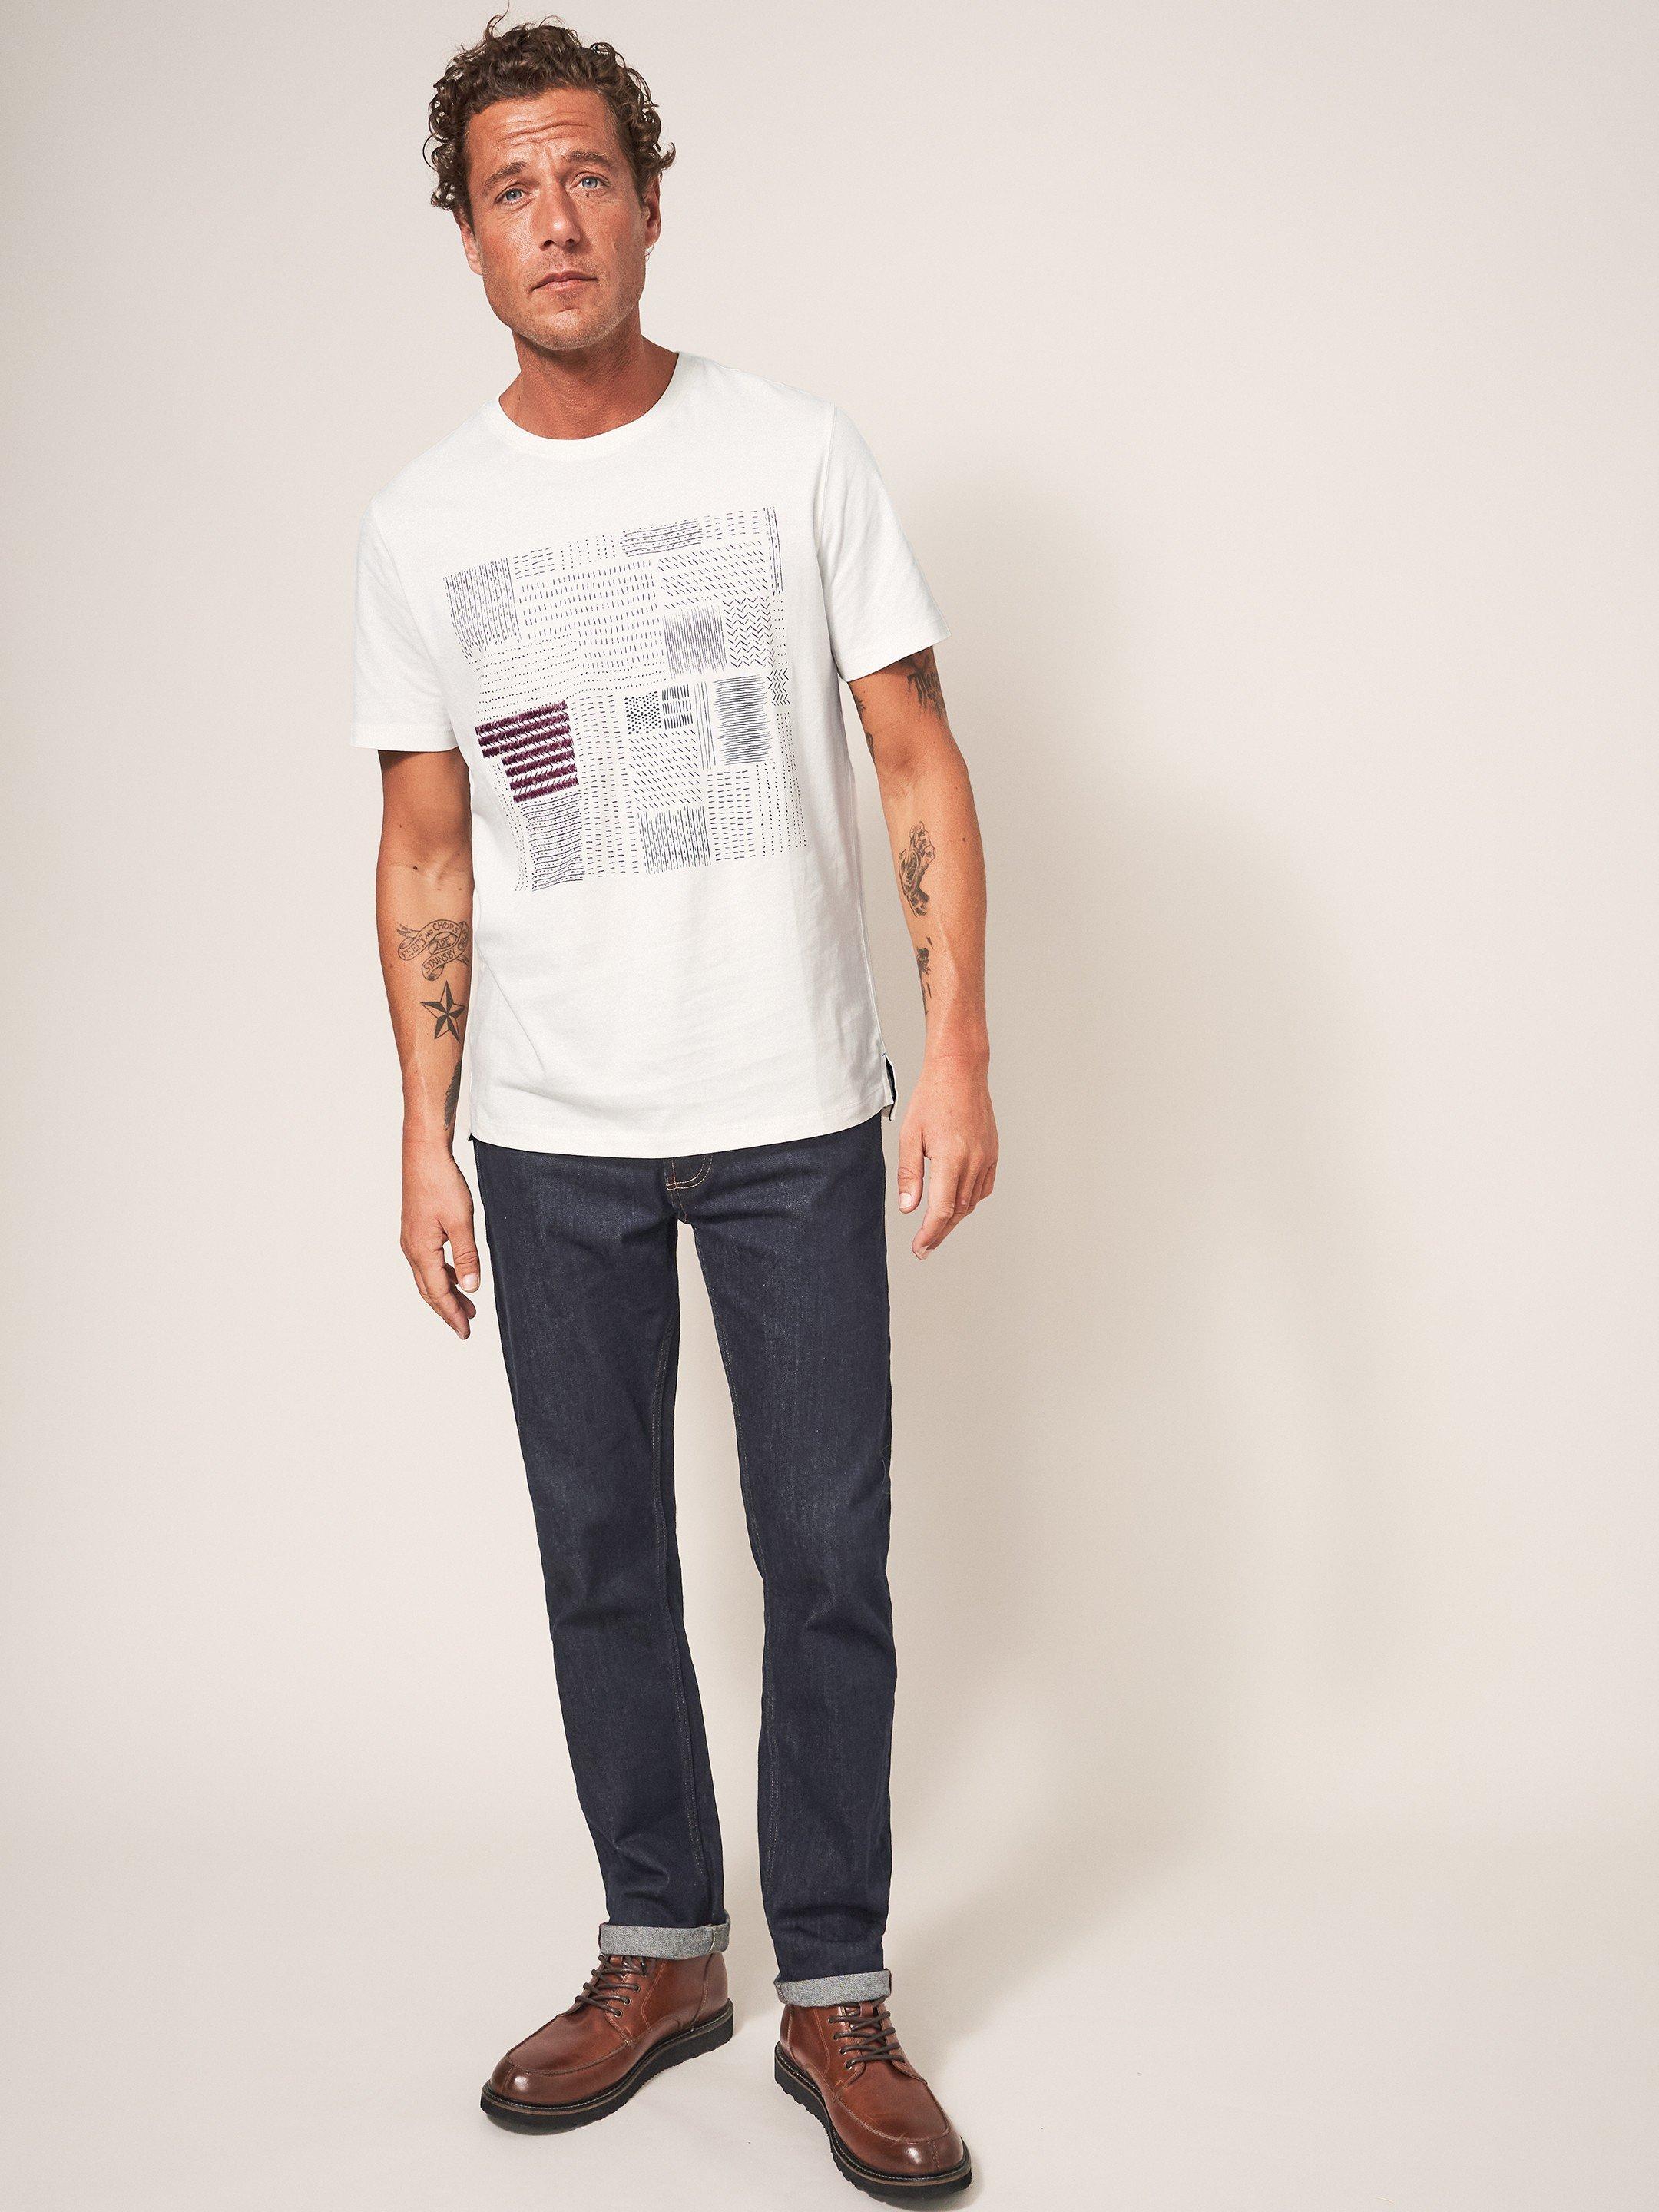 Patchwork Graphic Tshirt in NAT WHITE - MODEL FRONT